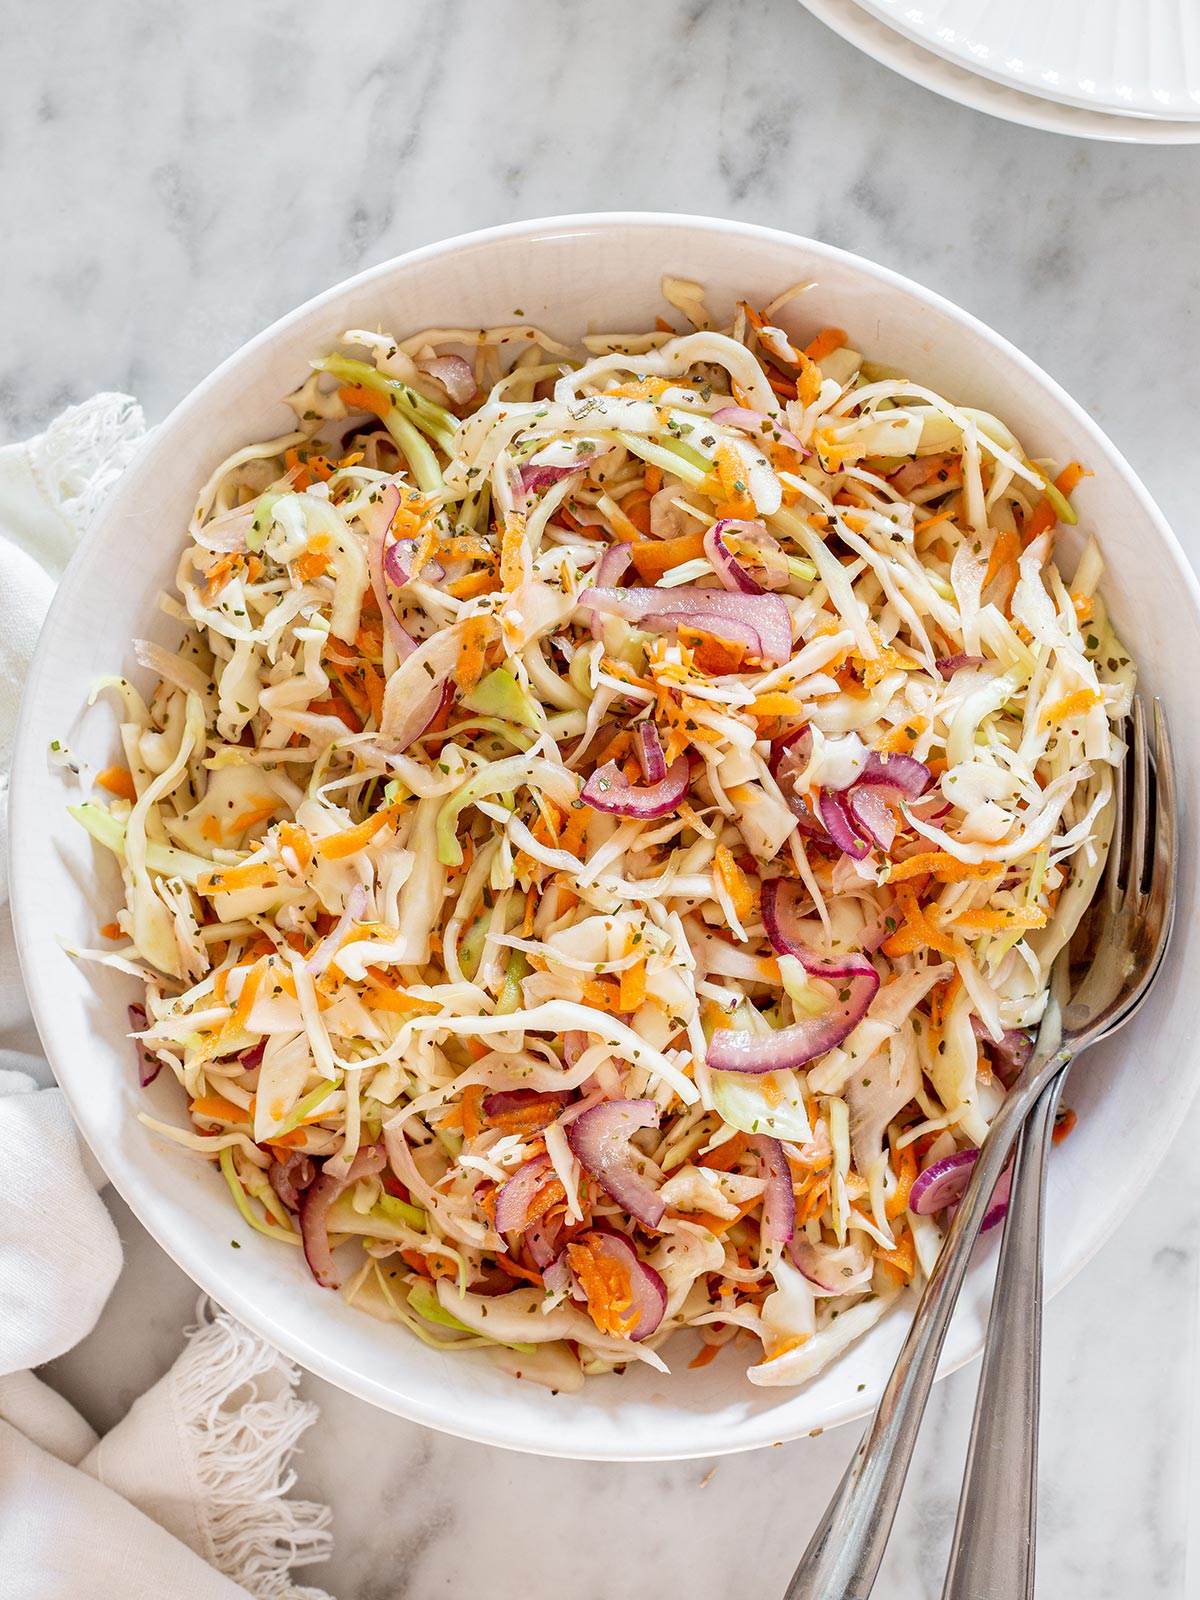 Mexican Cabbage Salad